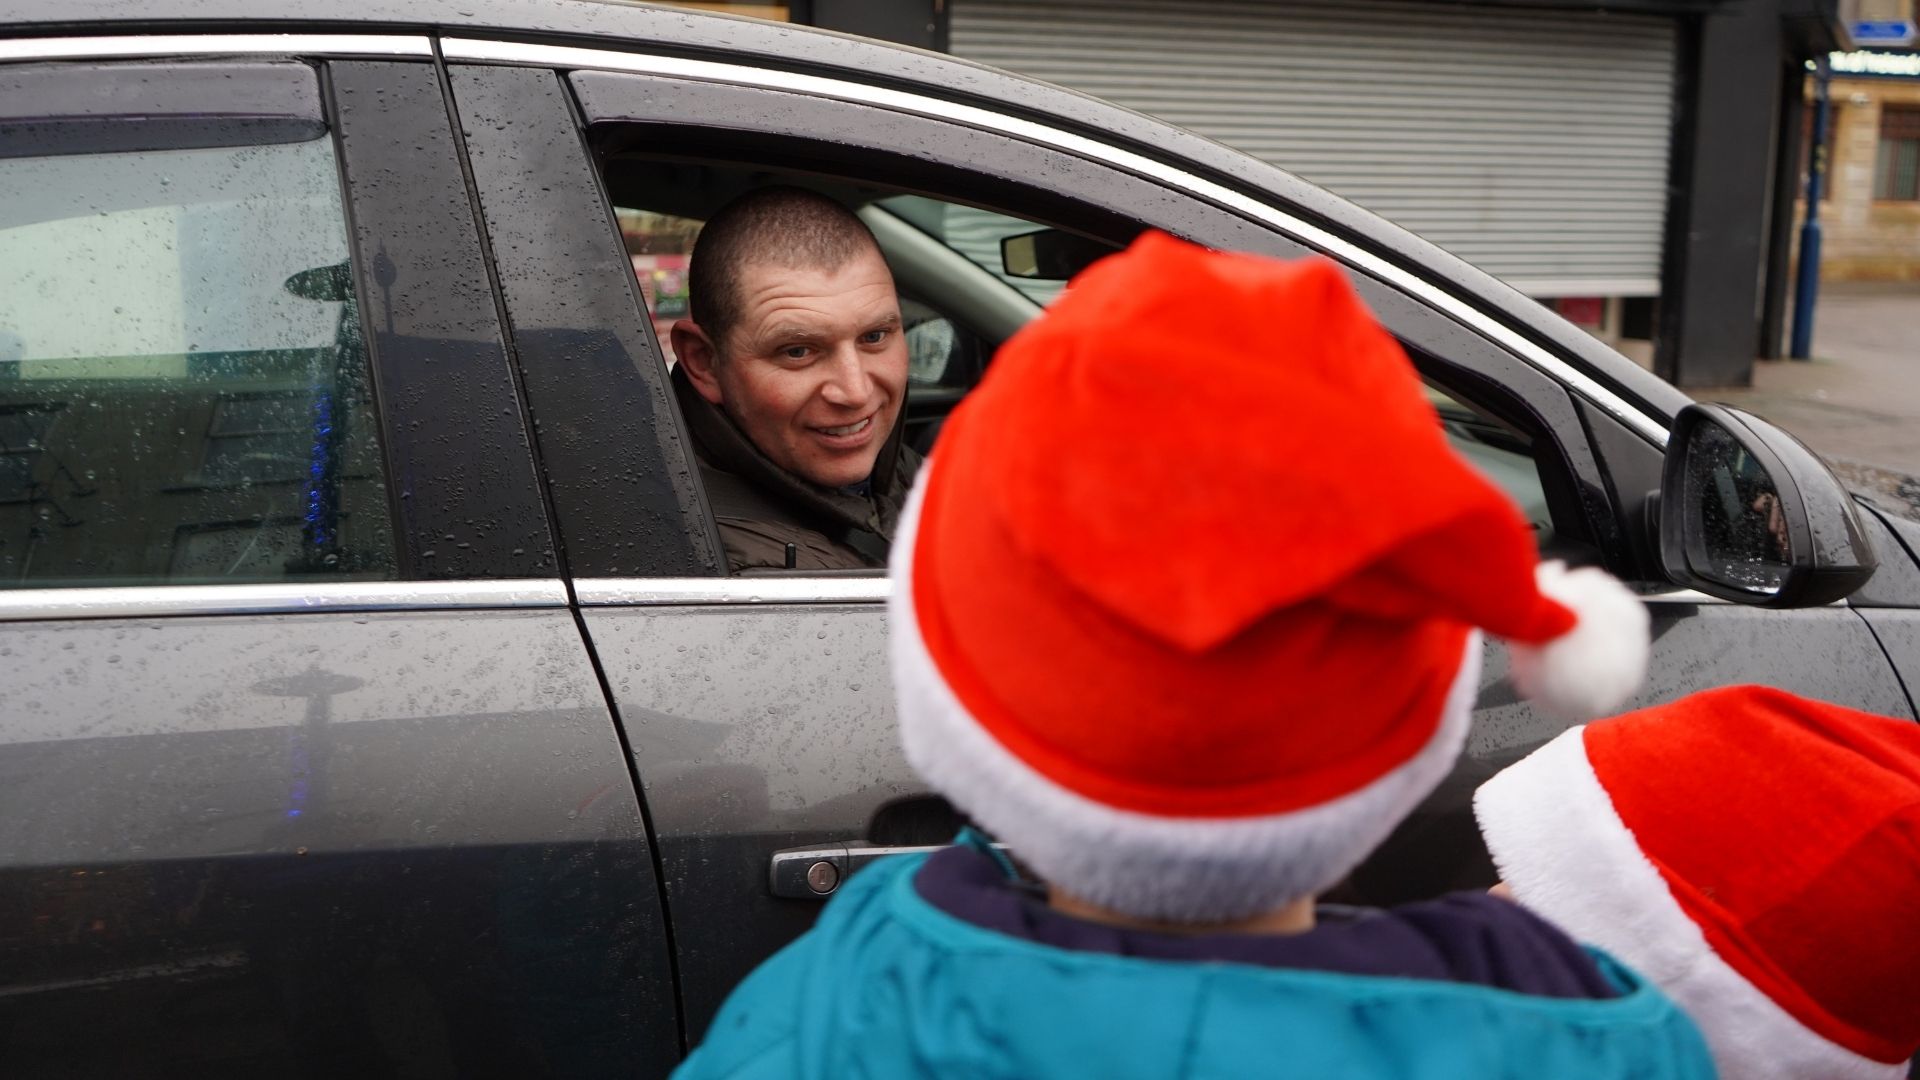 An Uber driver’s guide to Christmas